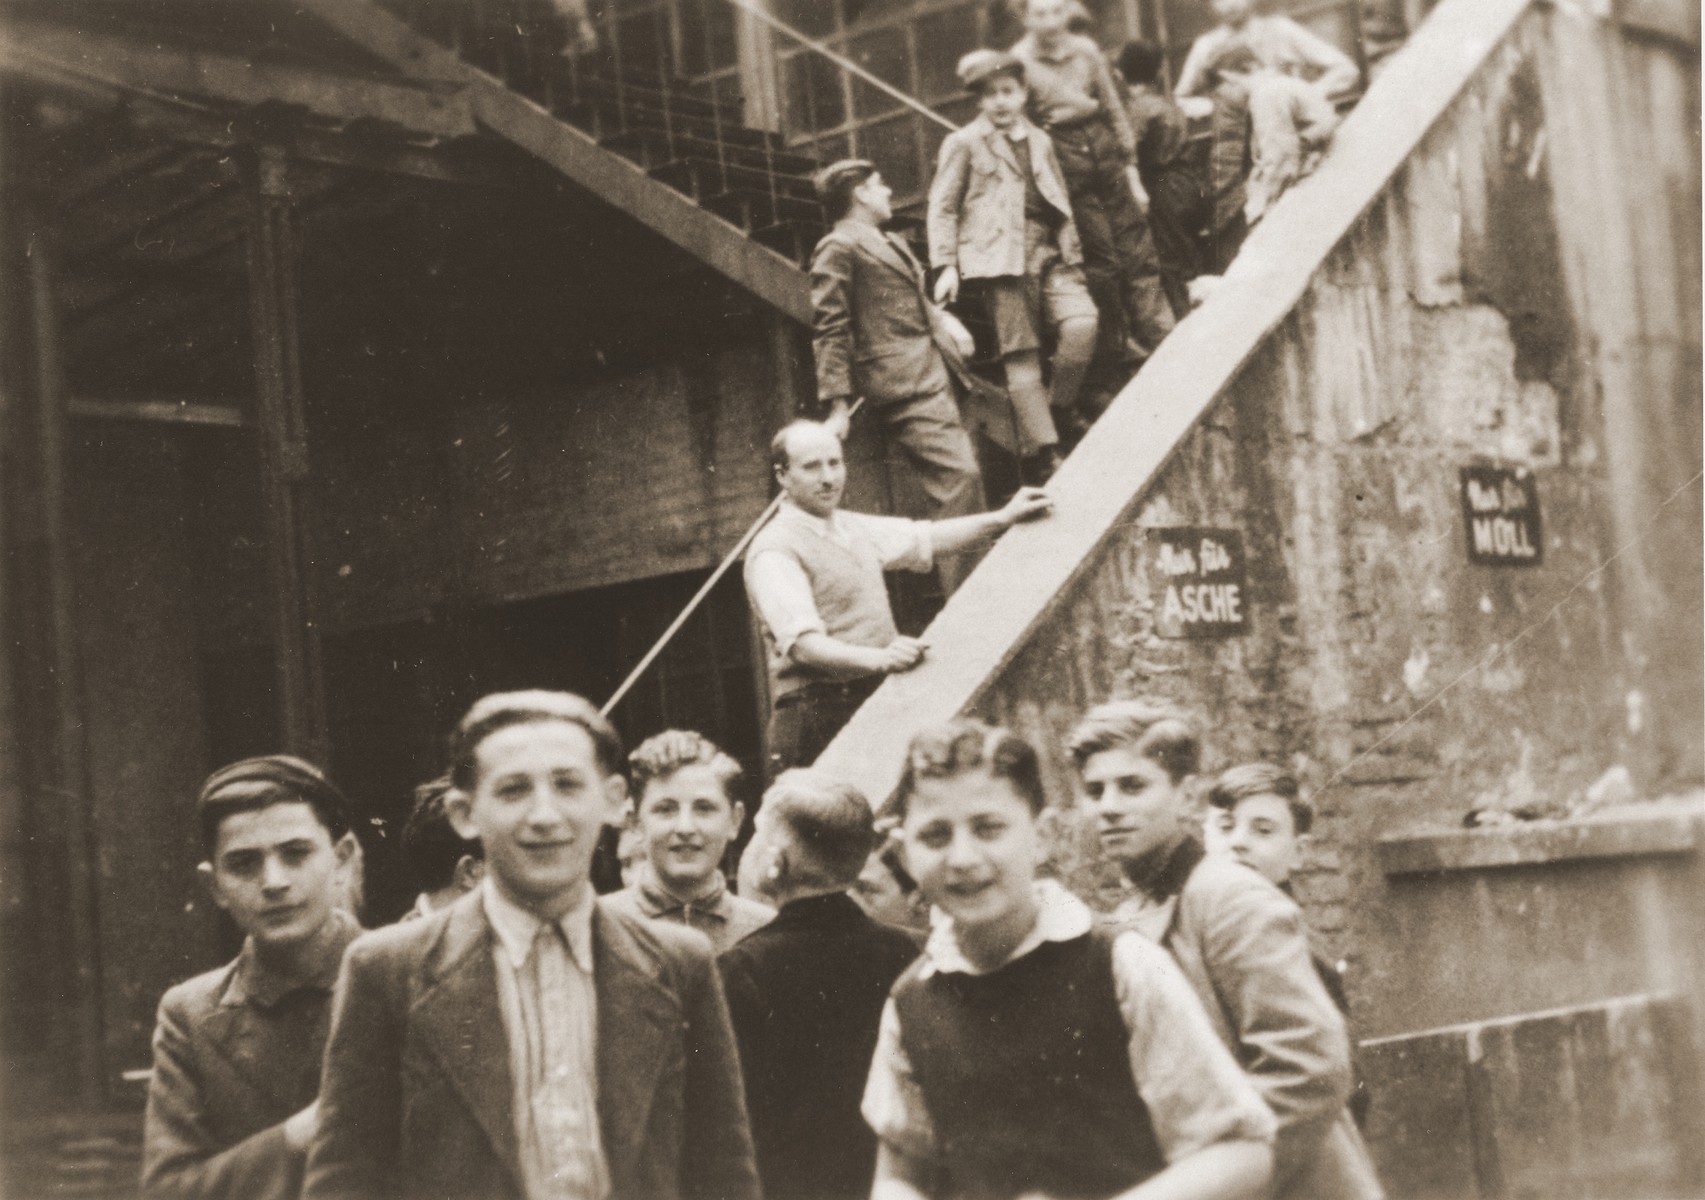 Jewish youth in the courtyard of the Juedische Anlehrnwerkstatt [Jewish vocational training school].

The Juedische Anlehrnwerkstatt was founded in 1936 by the Frankfurt Jewish community to train young Jews expelled from the German public schools.